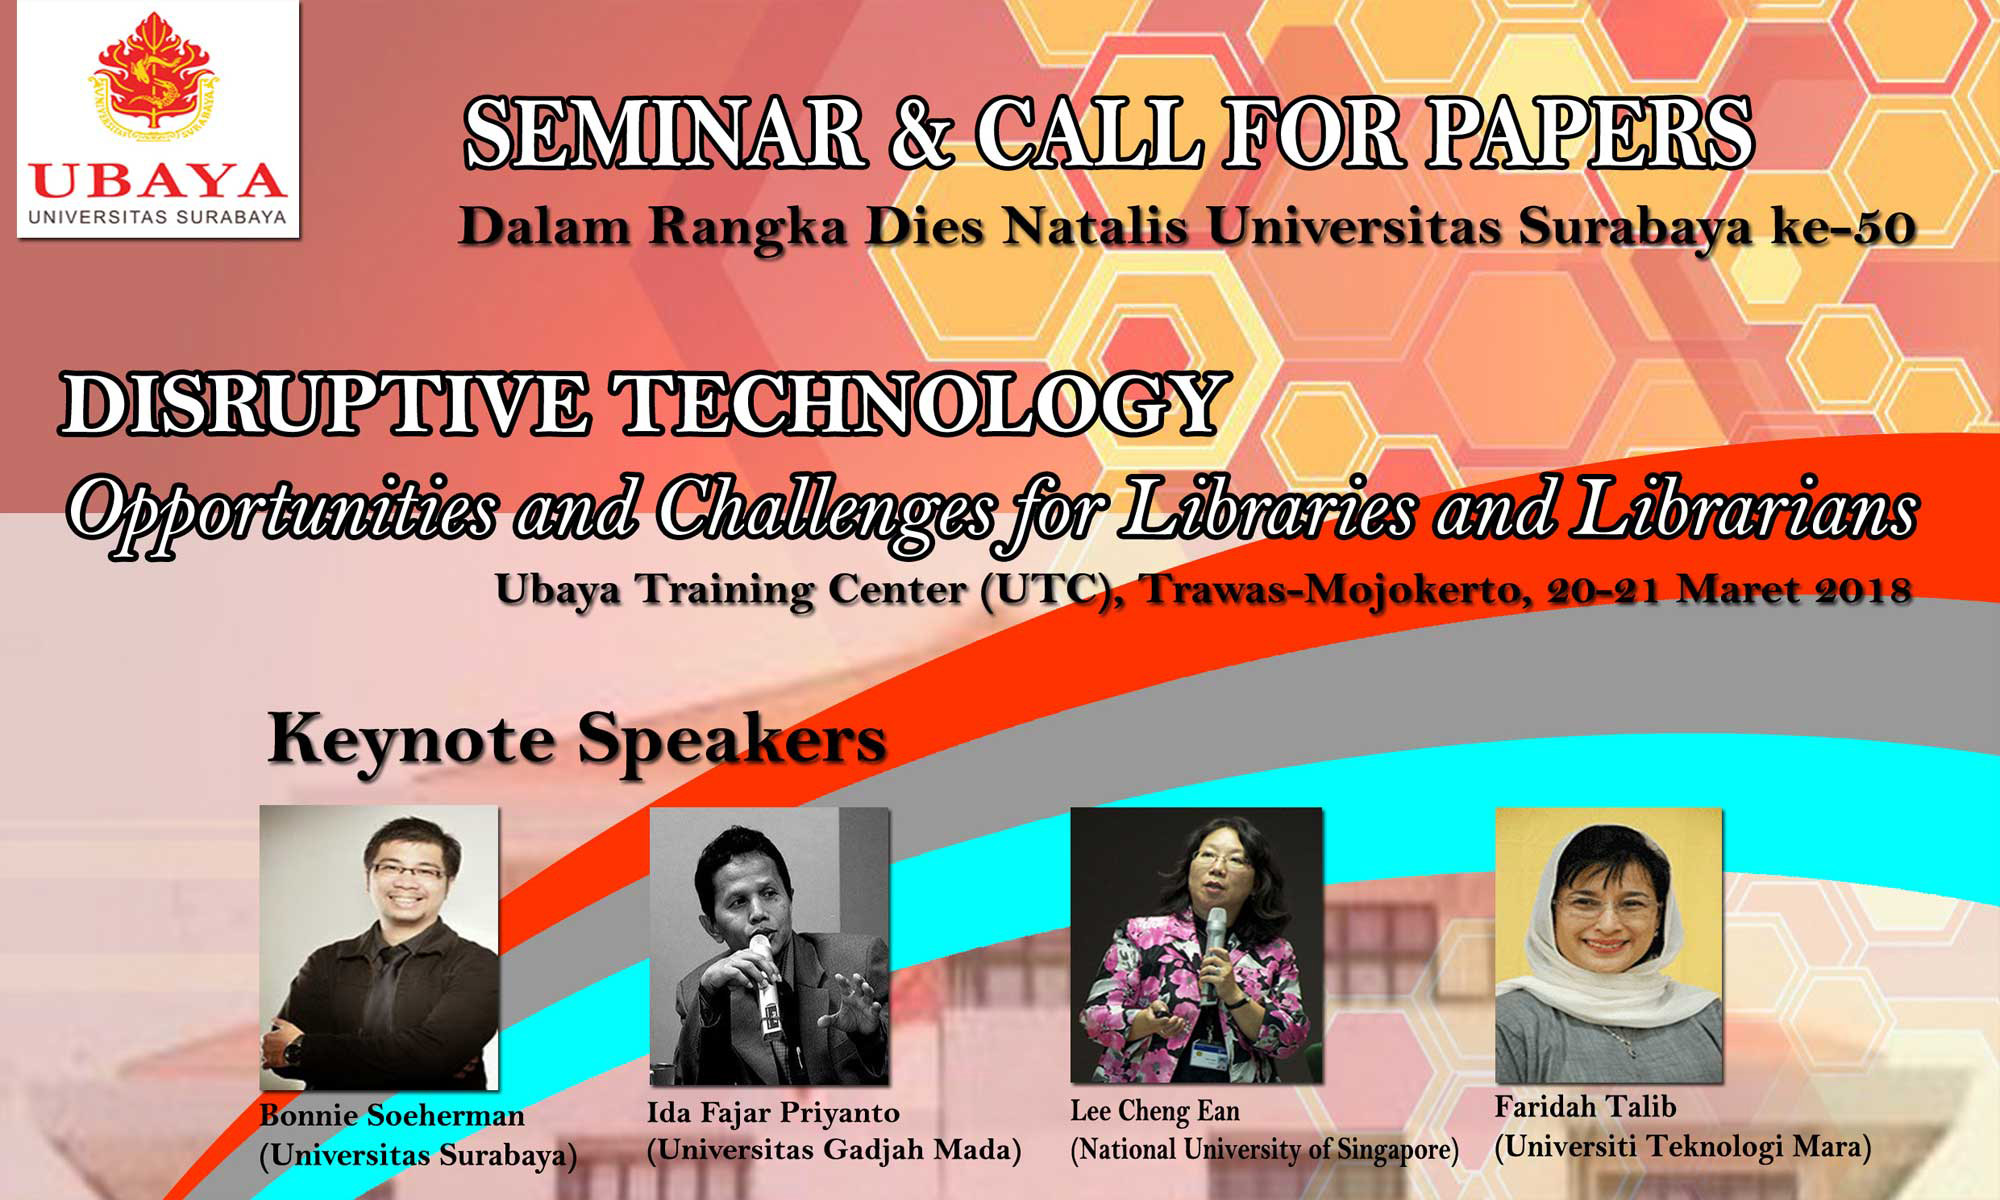 Seminar & Call for Papers